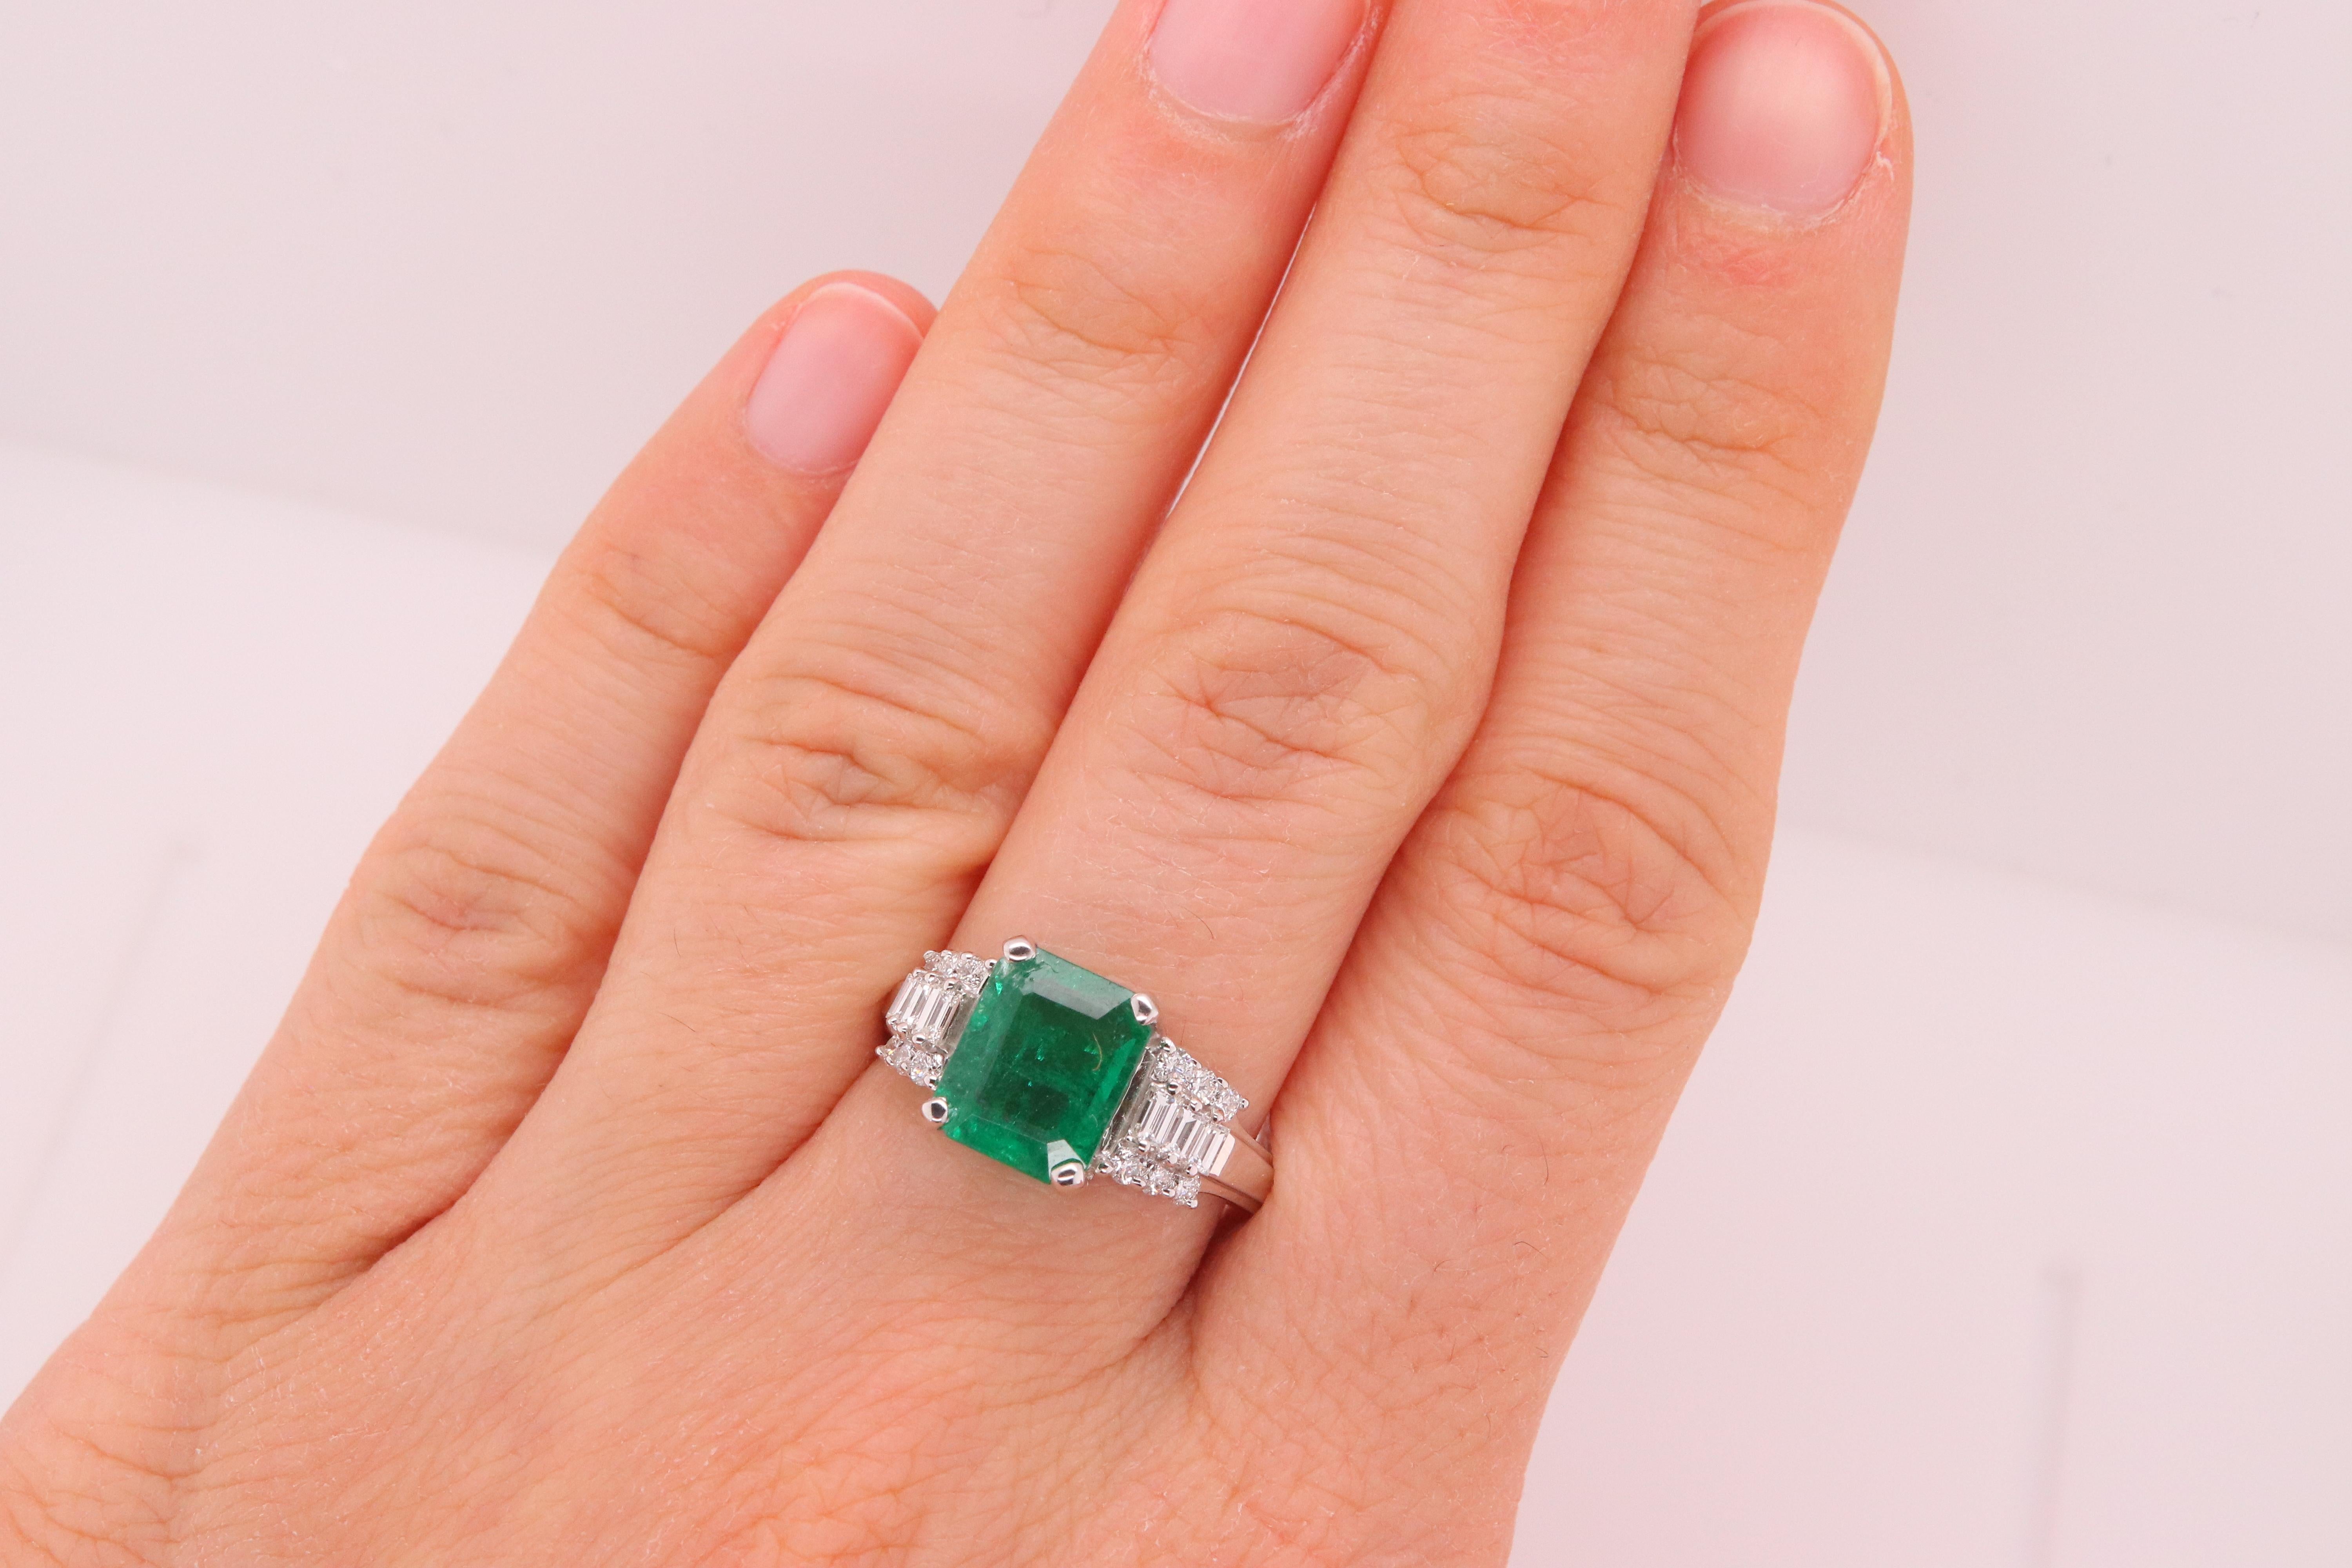 Material: 18k White Gold 
Center Stone Details: 1 Emerald Cut Emerald at 1.98 Carats - Measuring 9 x 7.3 mm
Diamond Details: 6 Baguette Diamonds at 0.24 Carats - Clarity: VS-SI / Color: G-H
Alberto offers complimentary sizing on all rings.

Fine